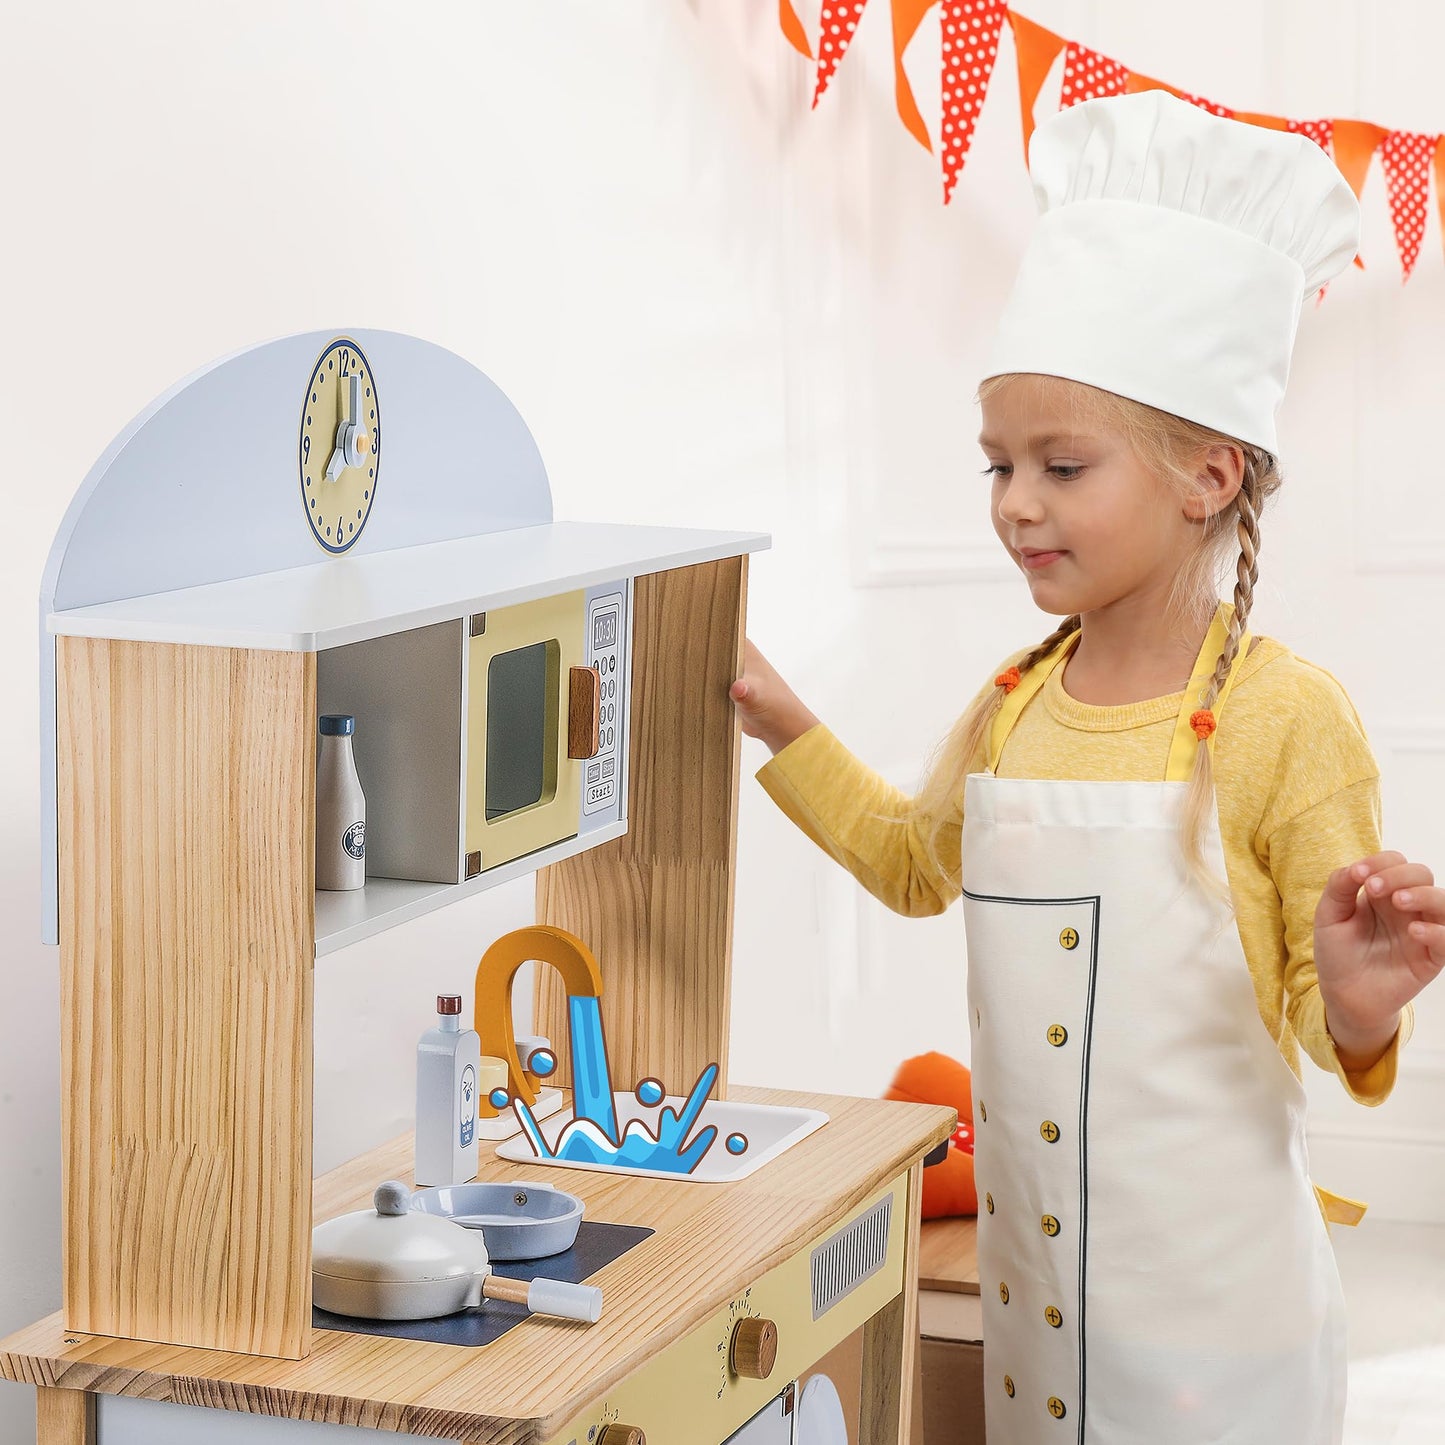 WoodenEdu Wooden Play Kitchen Set for Kids Toddlers, Toy Kitchen Gift for Boys Girls, Age 3+, Dimensions: 38” H x 31” W x 12” D